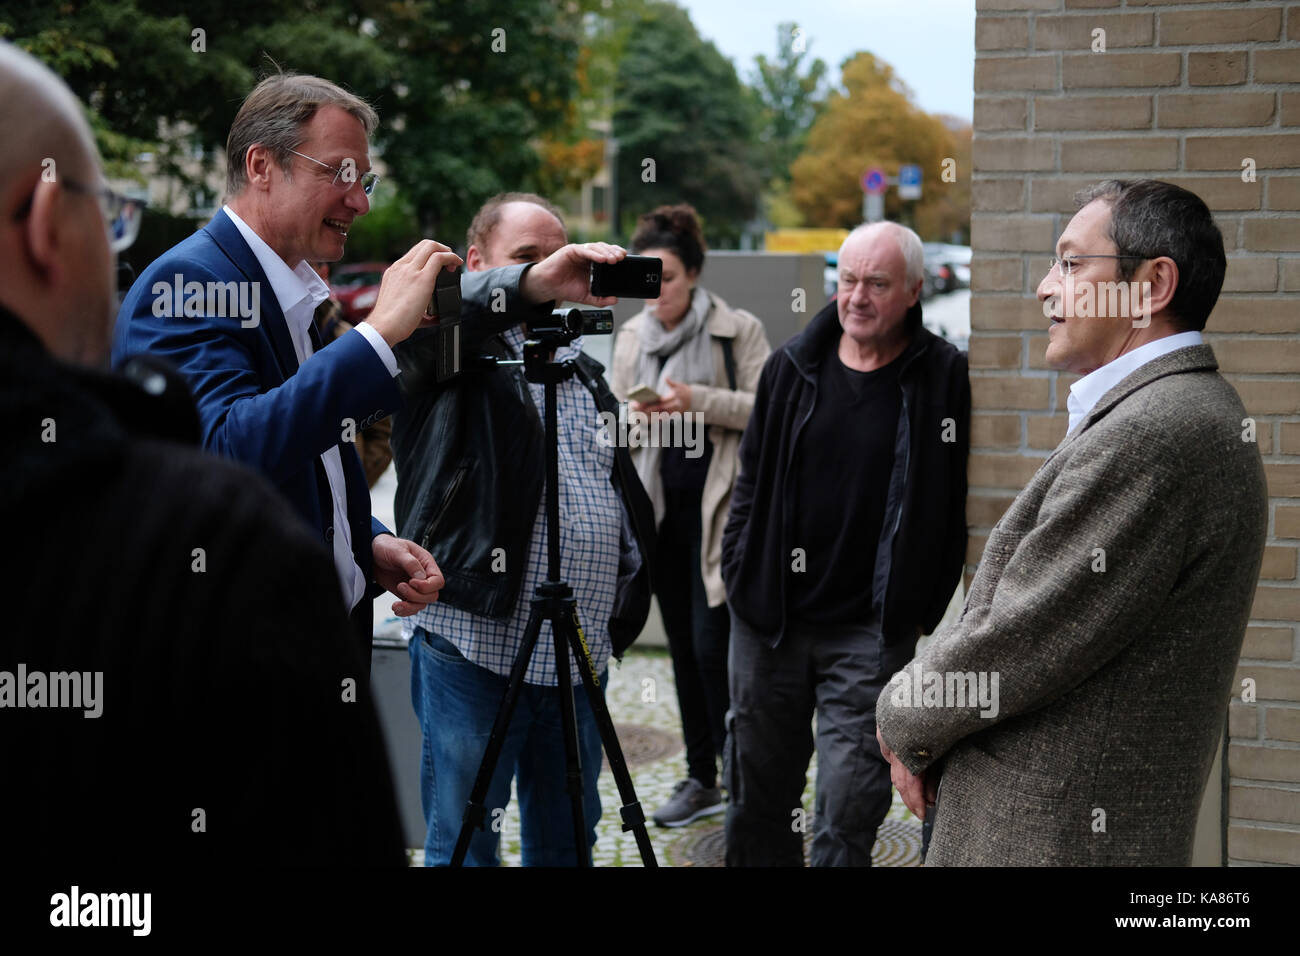 German-turkish author Akif Pirincci (R) speaks to journalists outside the district court in Dresden, Germany, 25 September 2017. Pirincci was sentenced to pay a 11,700 Euro fine following a hate speech at an event of the islamophobic movement 'Pegida', but filed an objection. Photo: Sebastian Willnow/dpa-Zentralbild/dpa Stock Photo